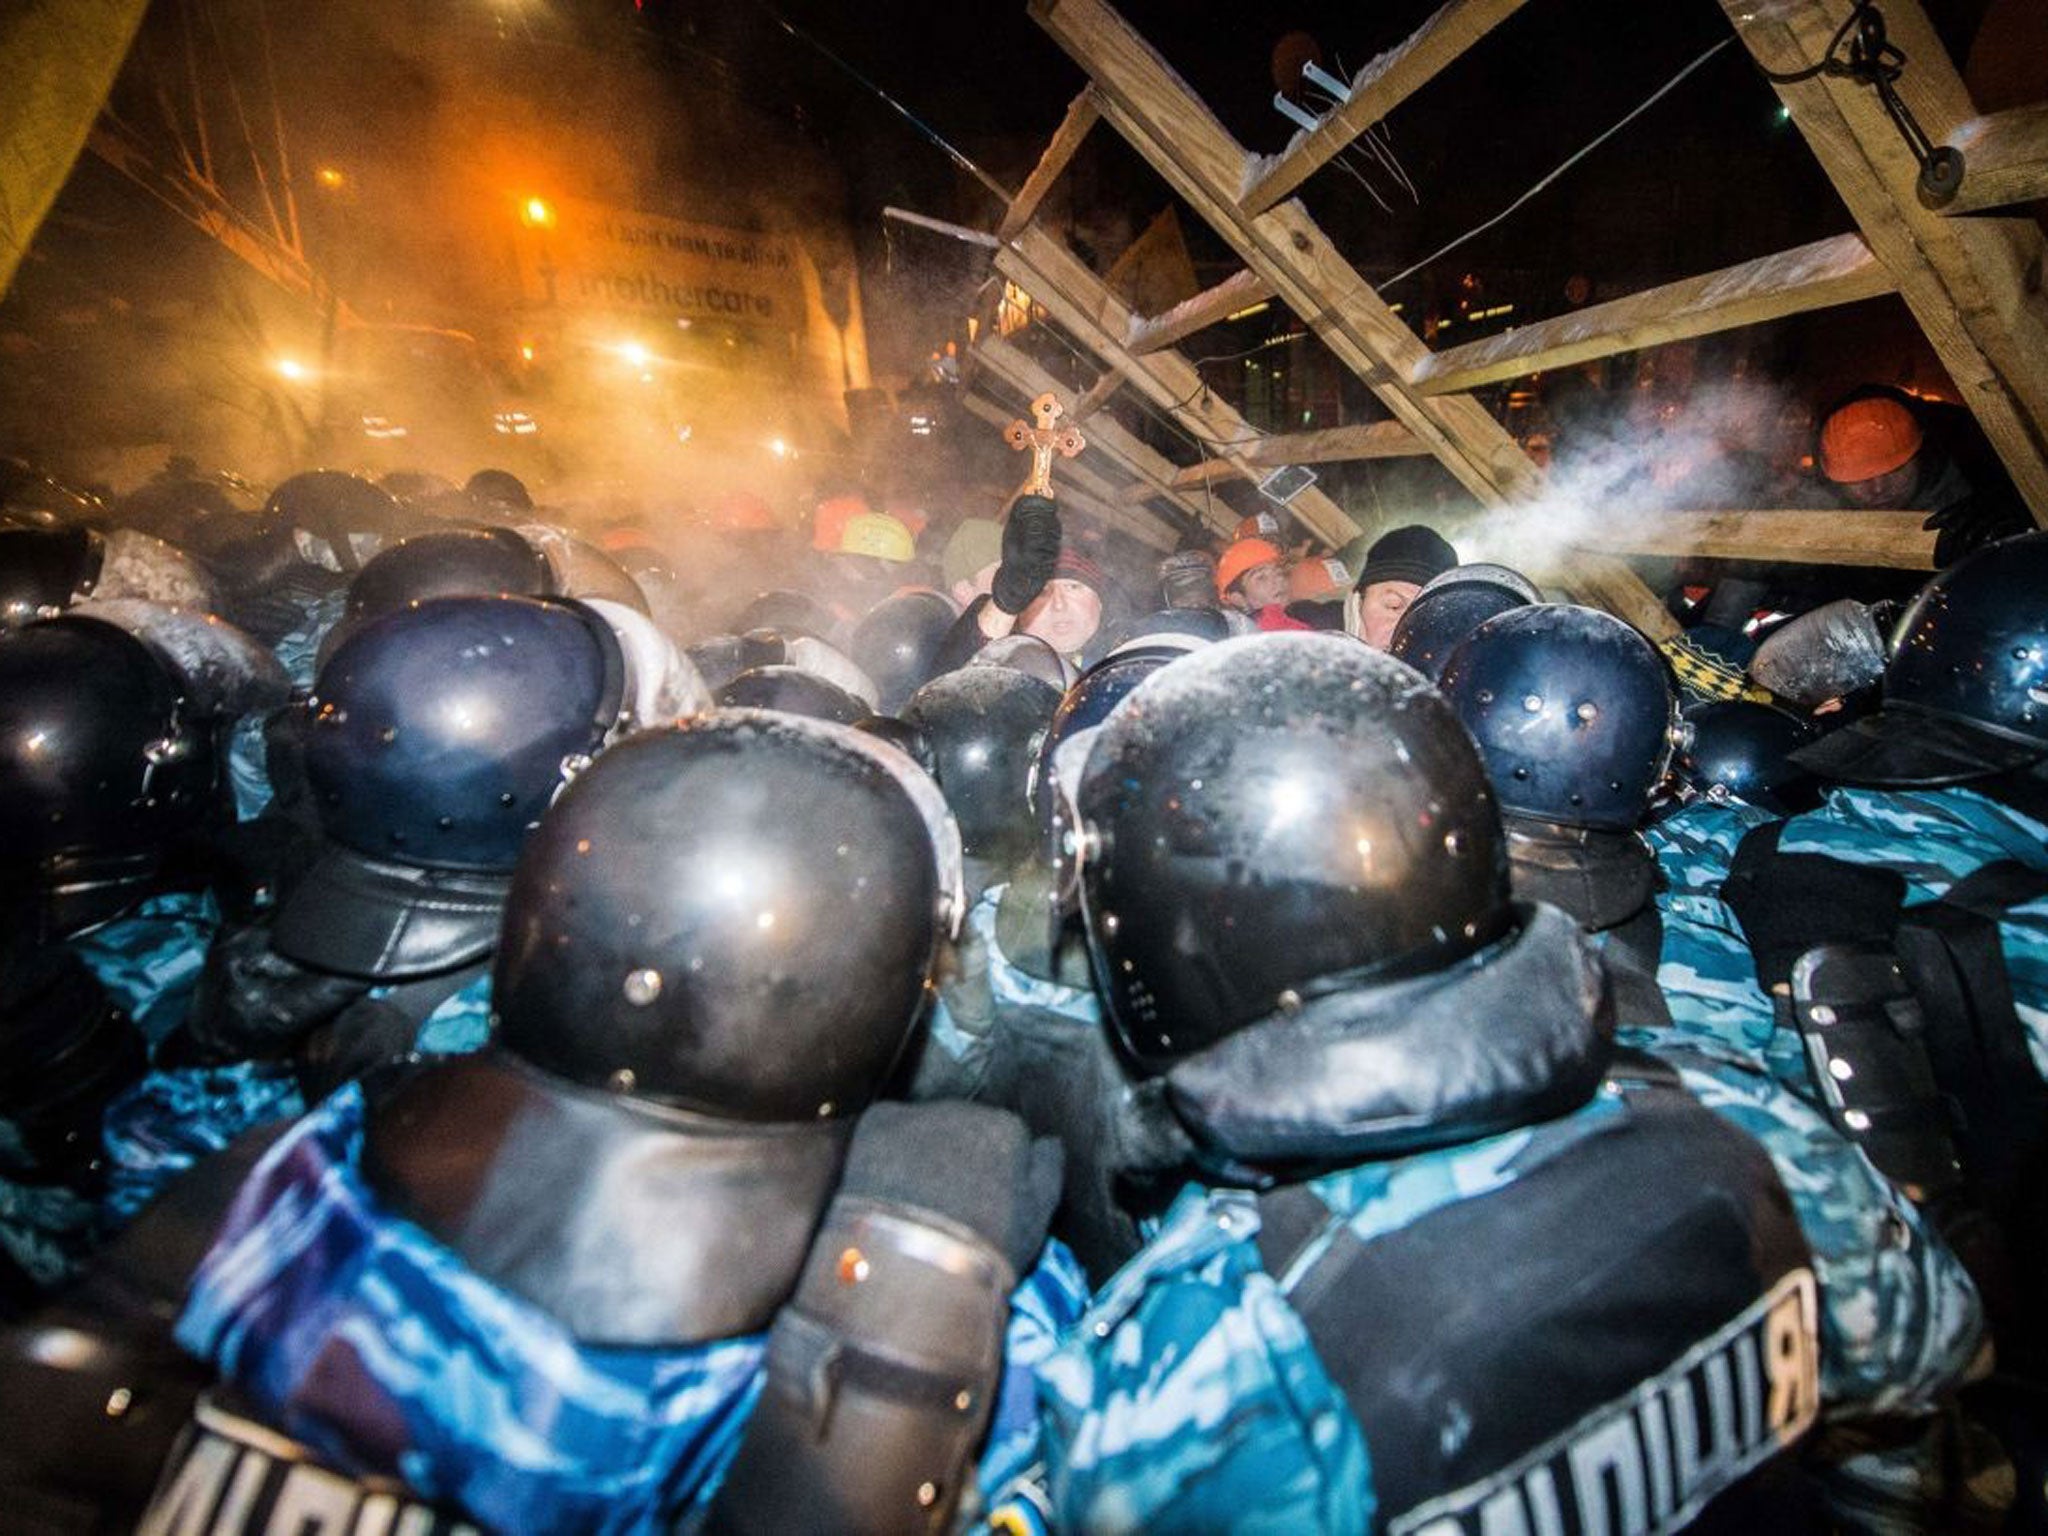 Riot police assault a  barricade held by protesters on Independence Square in Kiev late on 11 December, 2013